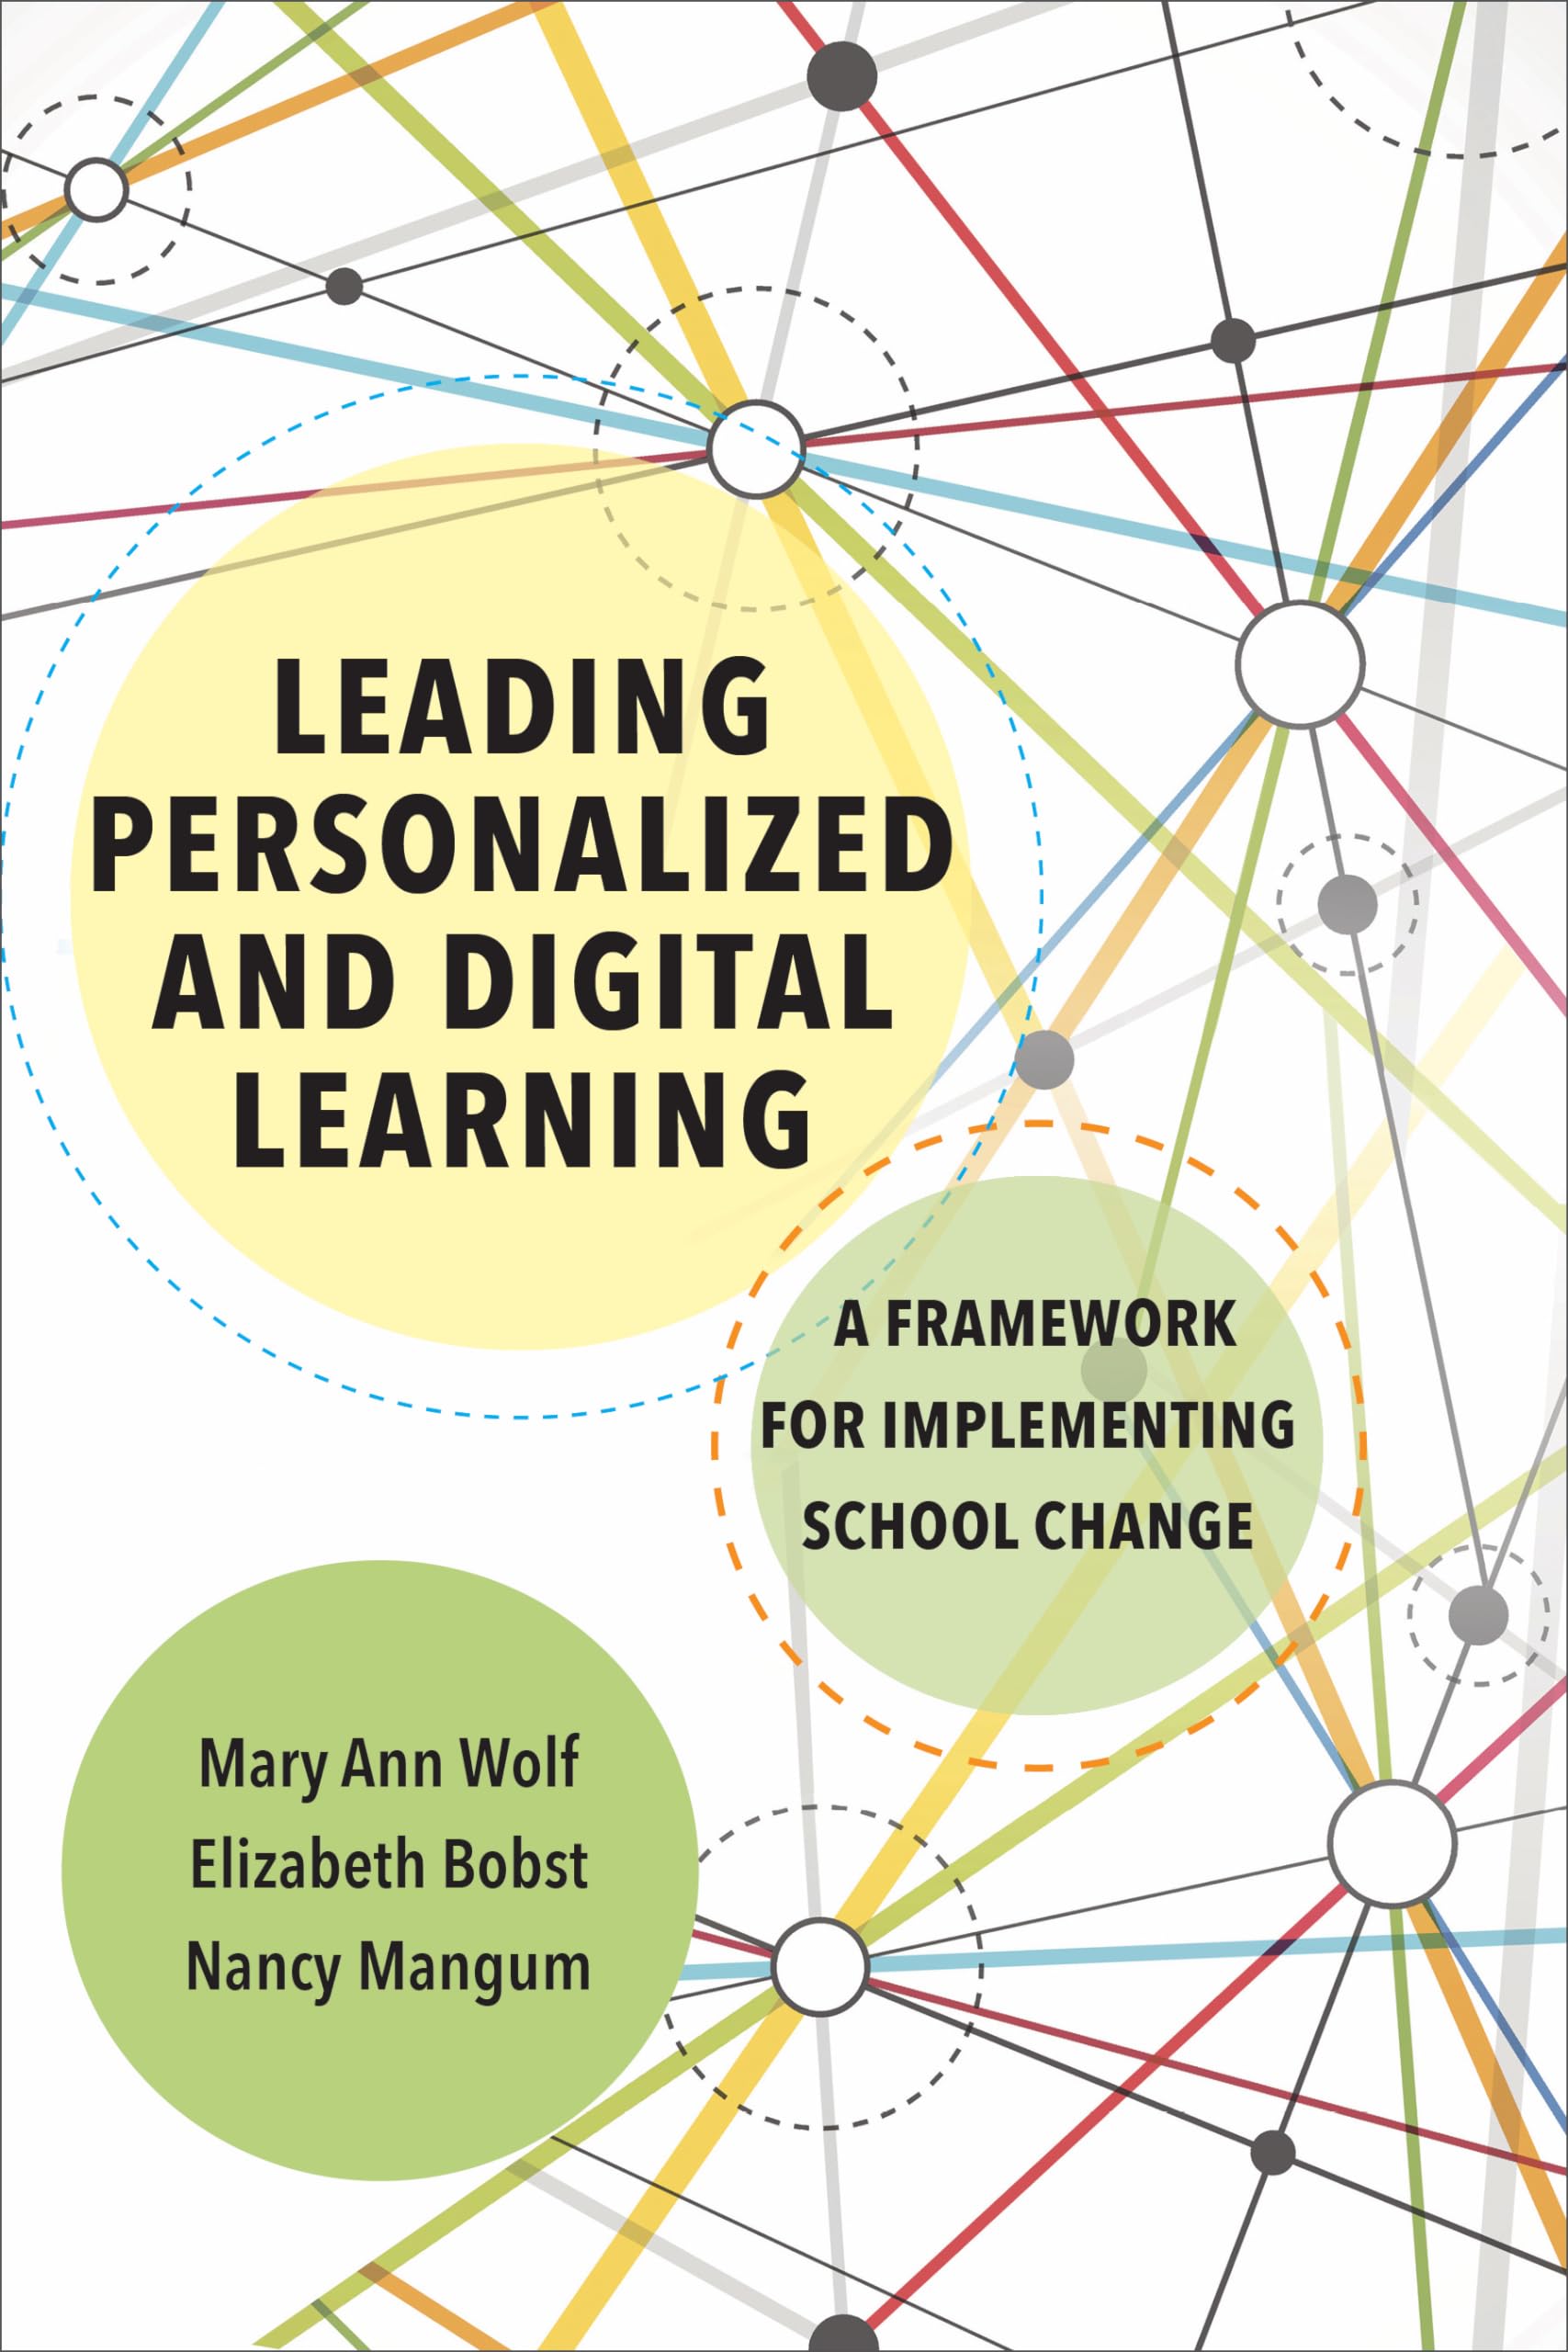 Leading Personalized and Digital Learning: A Framework for Implementing School Change